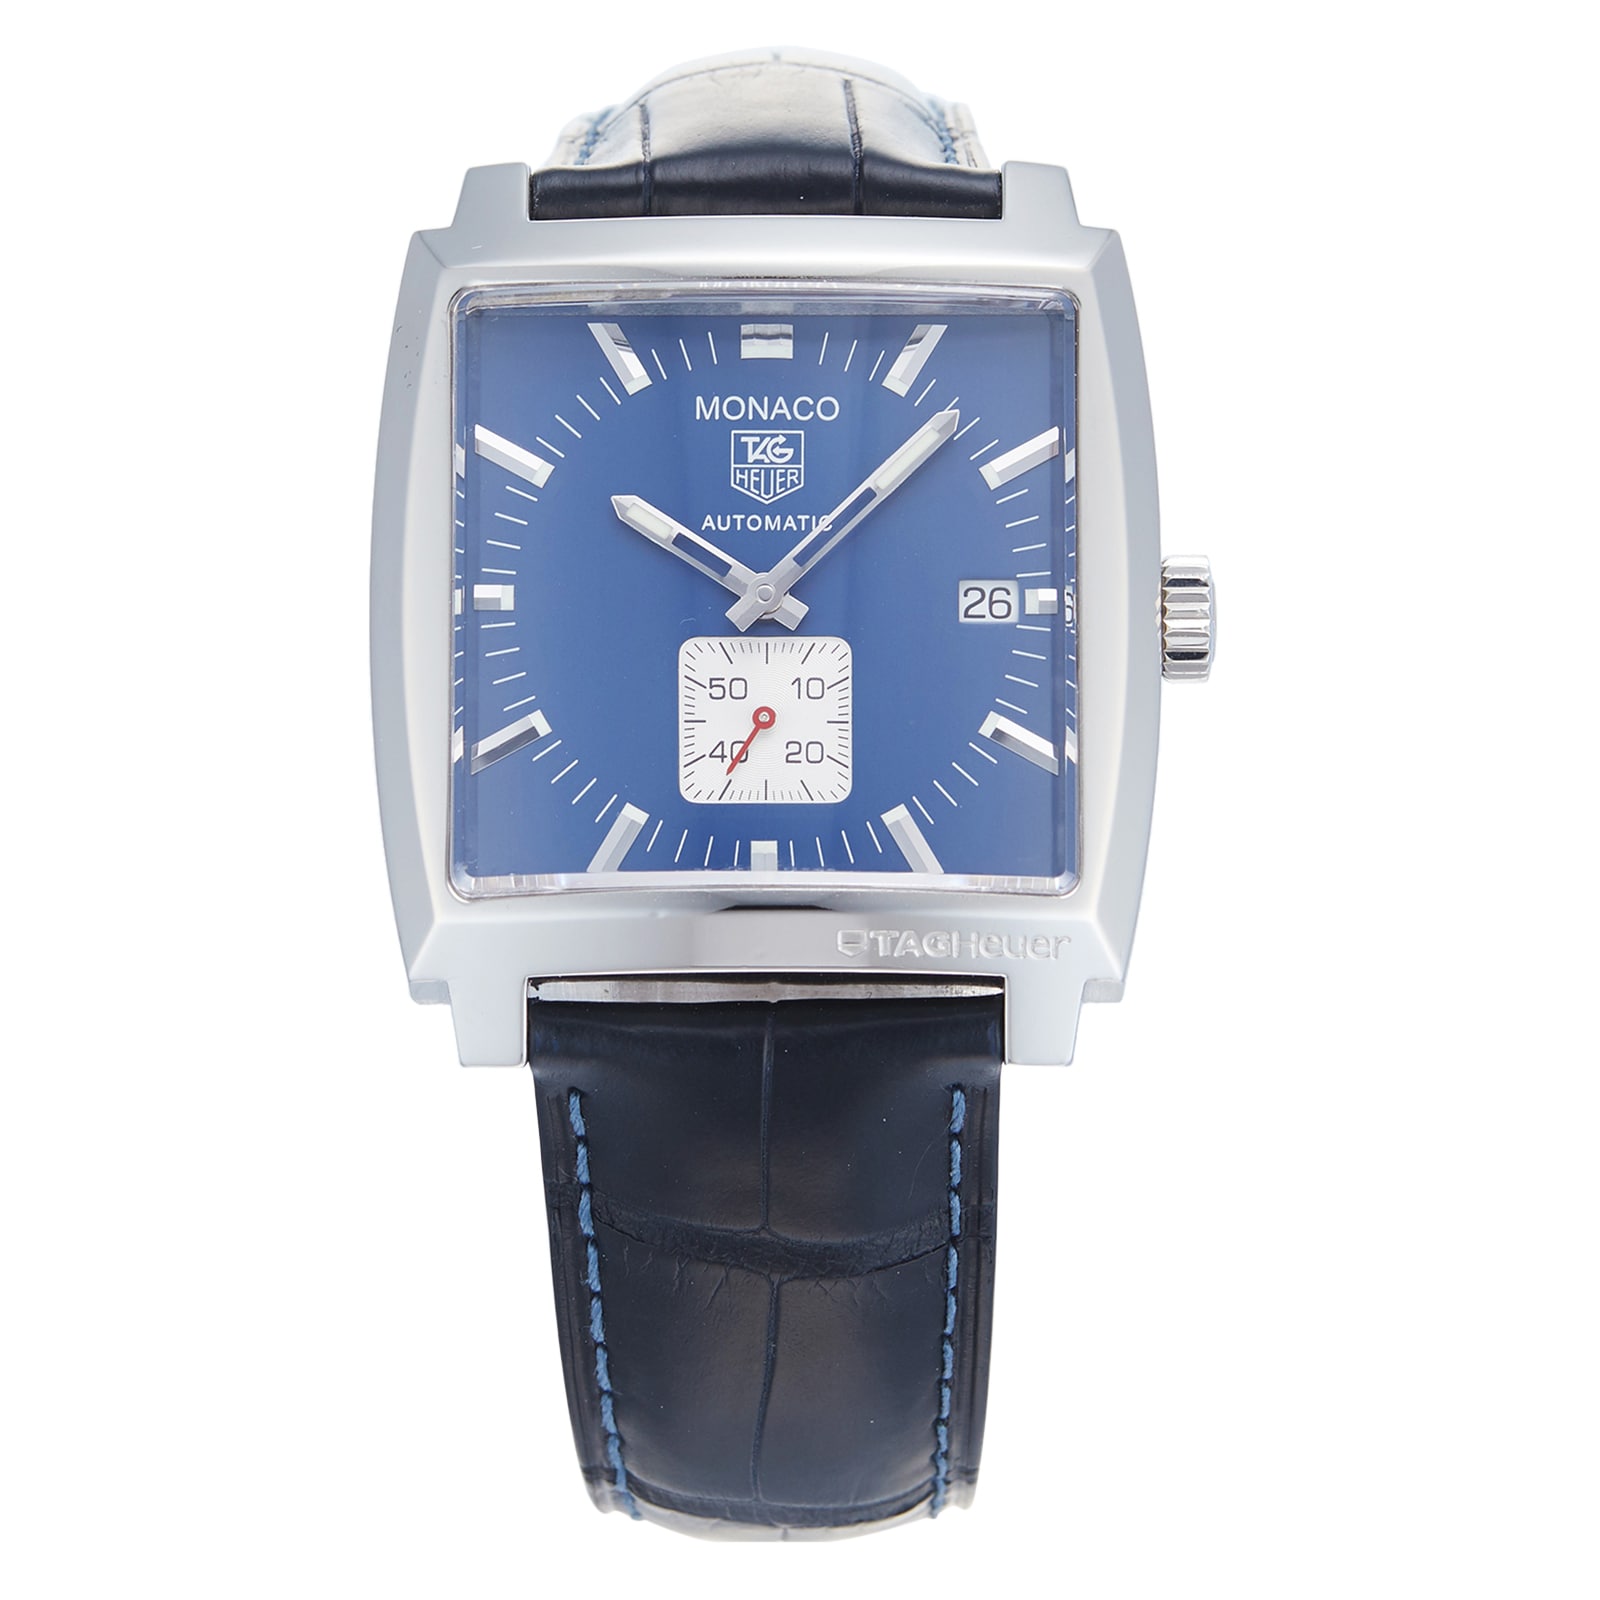 Tag Heuer Monaco] Considering buying this watch used. What are